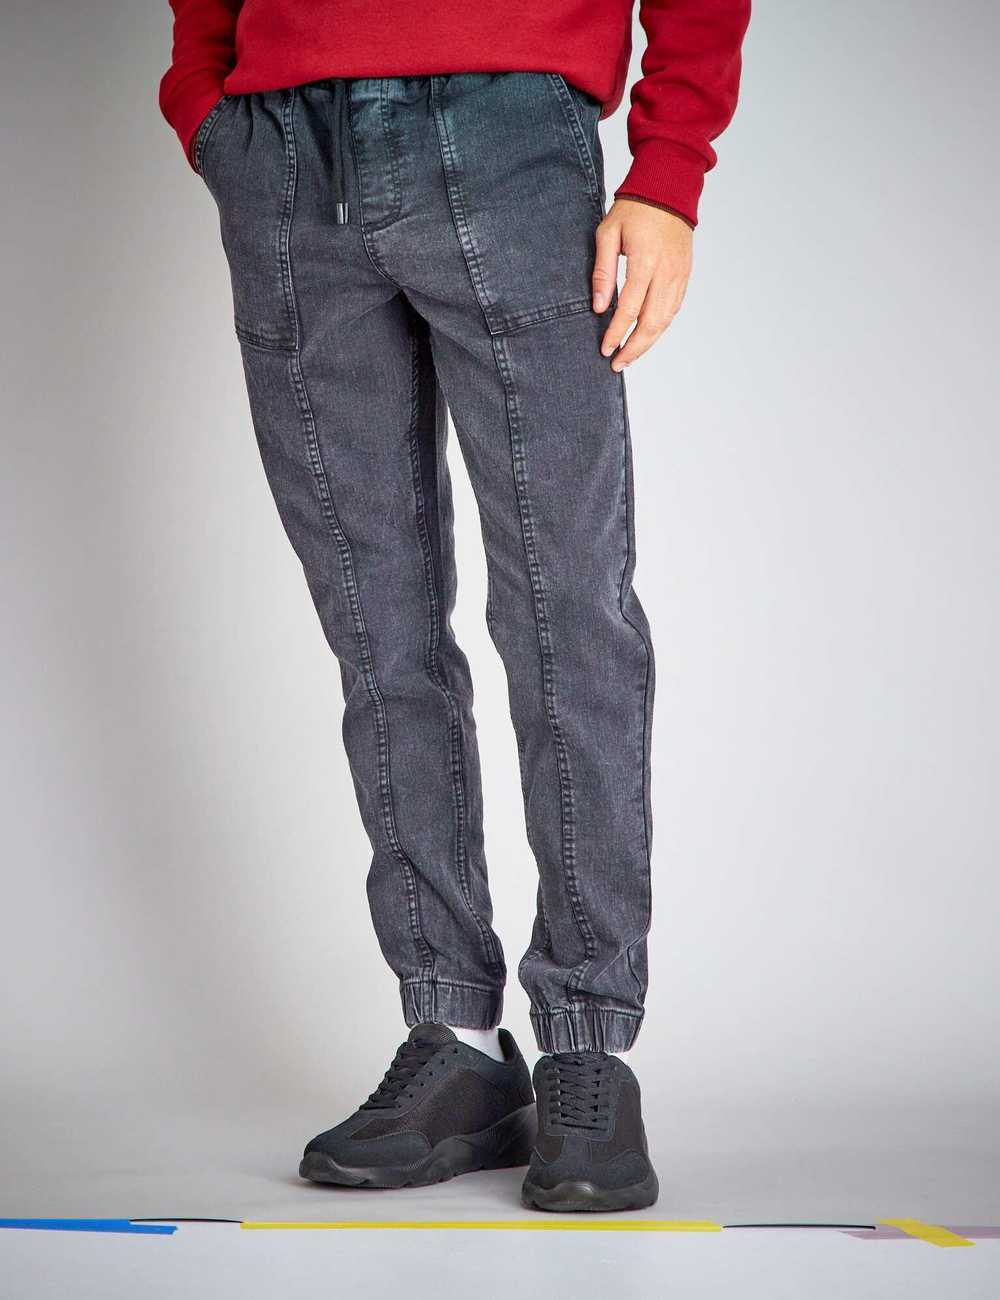 Buy Jogger-style jeans with elasticated waist Online in Dubai